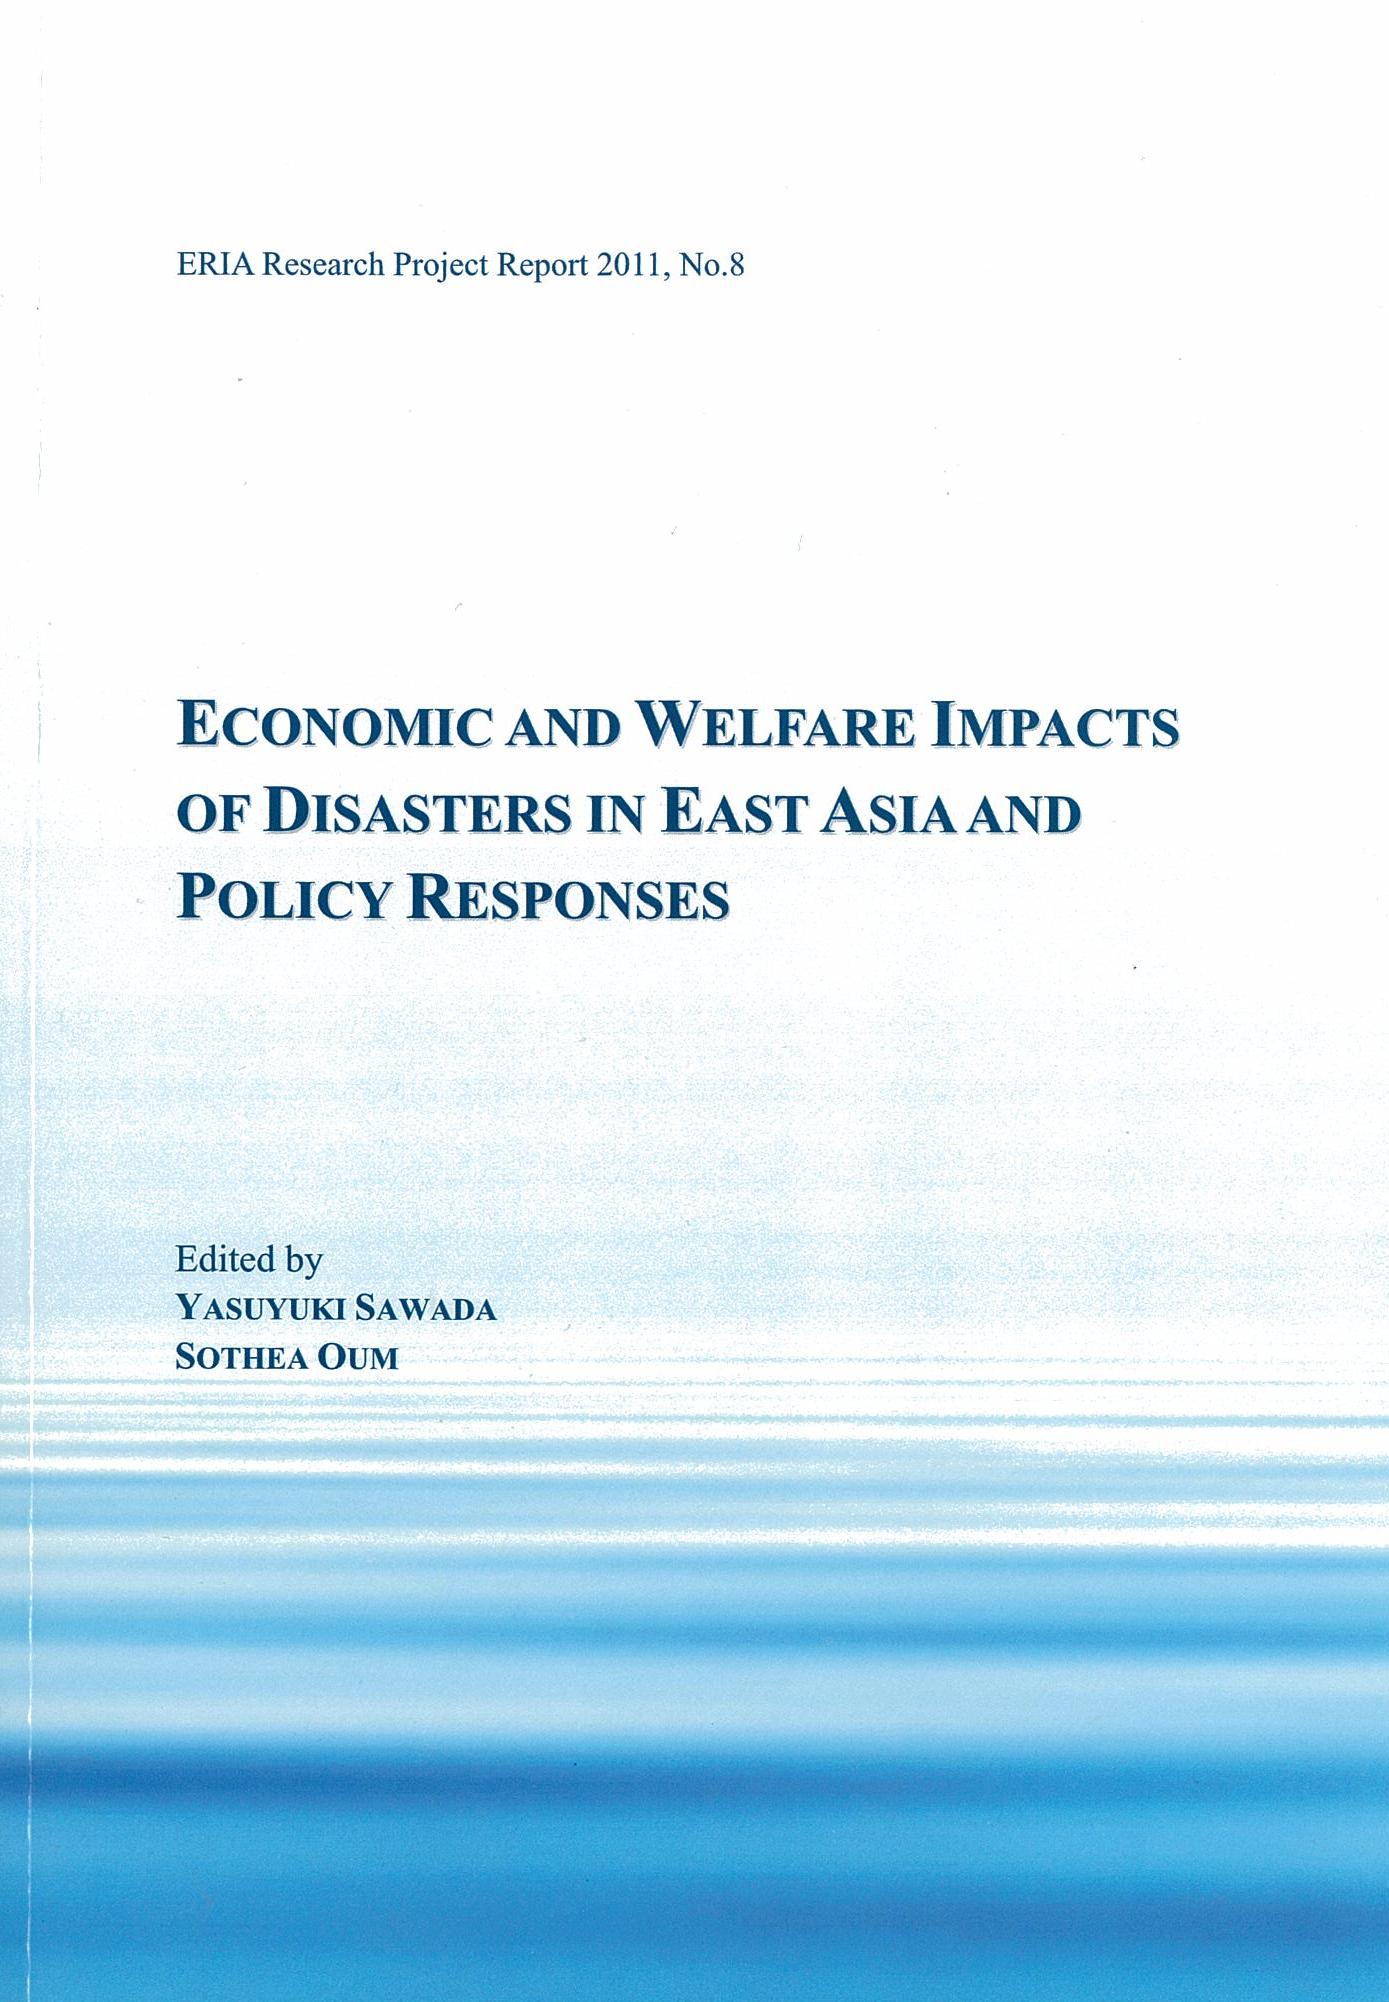 Economic and Welfare Impacts of Disasters in East Asia and Policy Responses